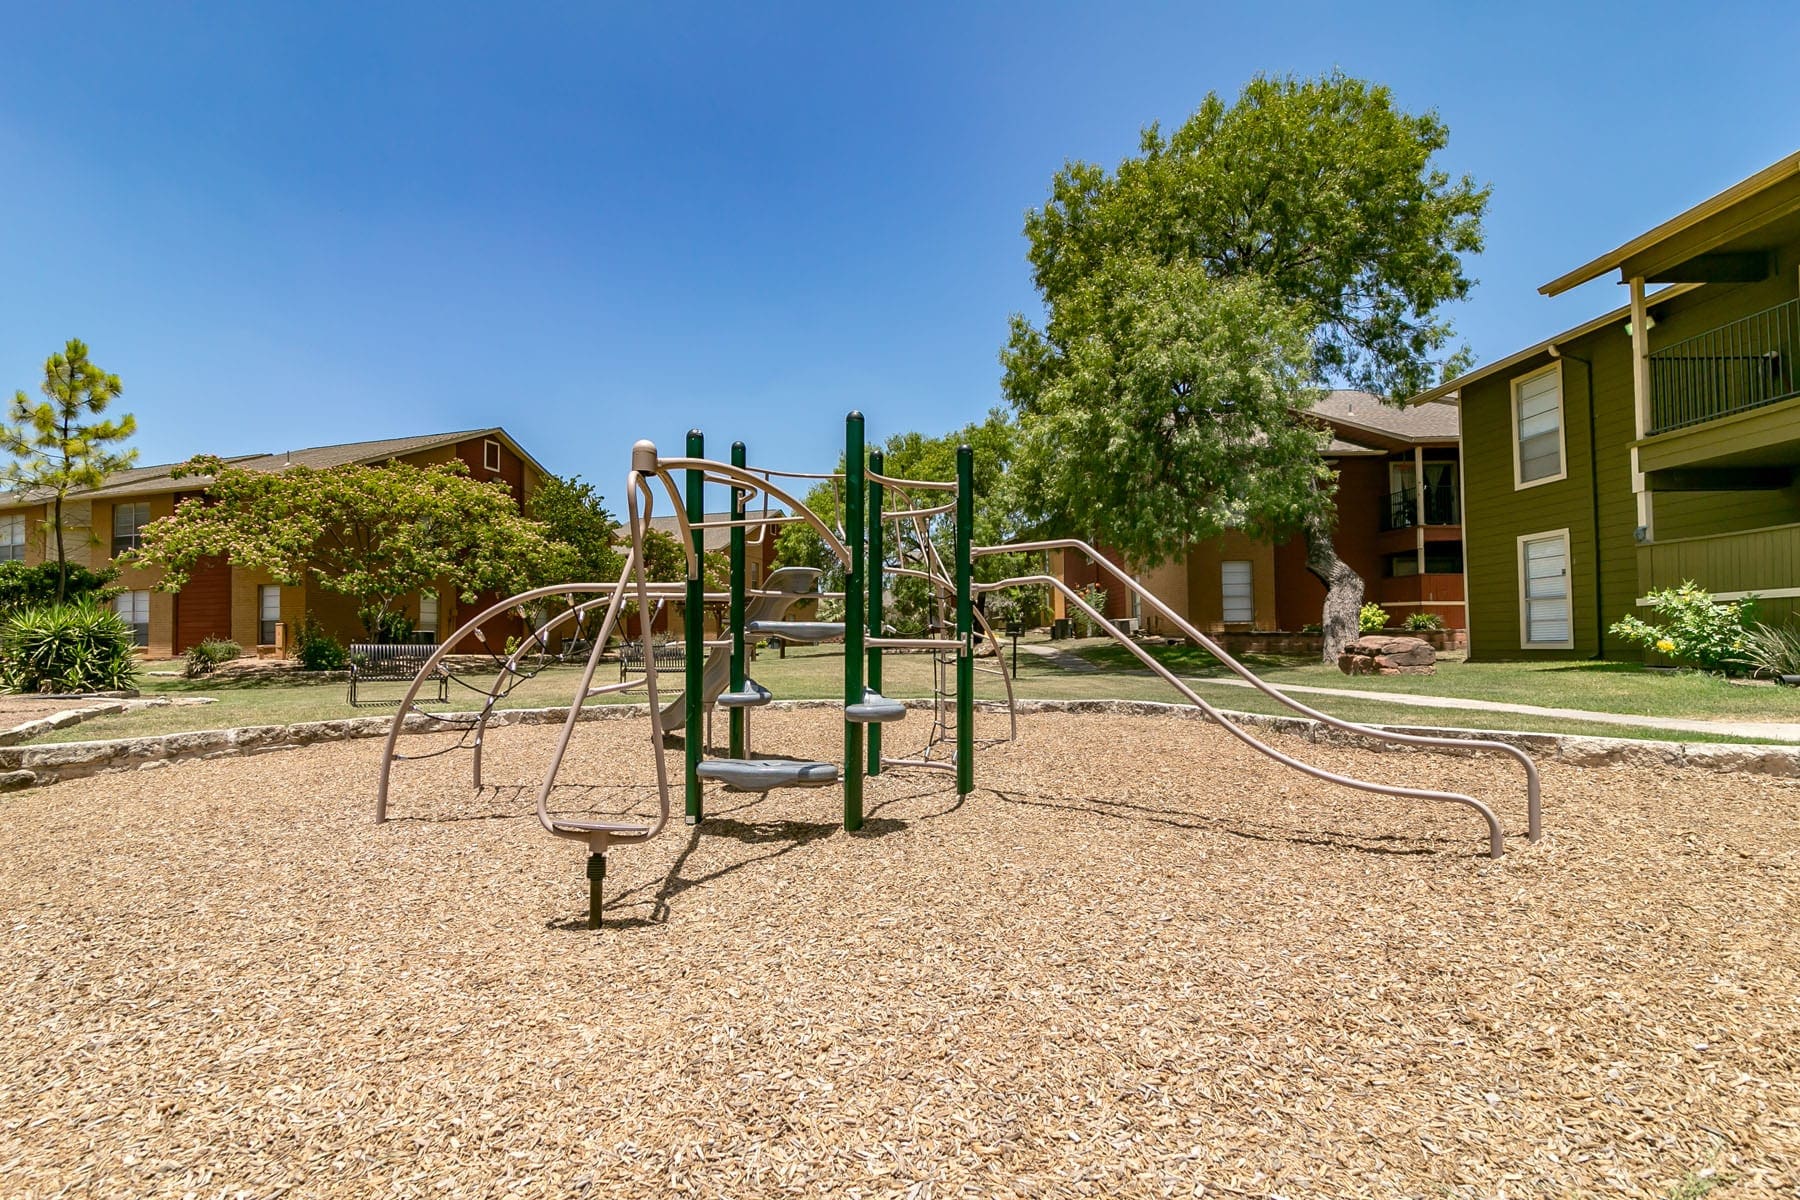 San Antonio TX Apartments for Rent - City-Base Vista - Resident Playground With a Bench, Steps, Slides, and Other Interactive Equipment